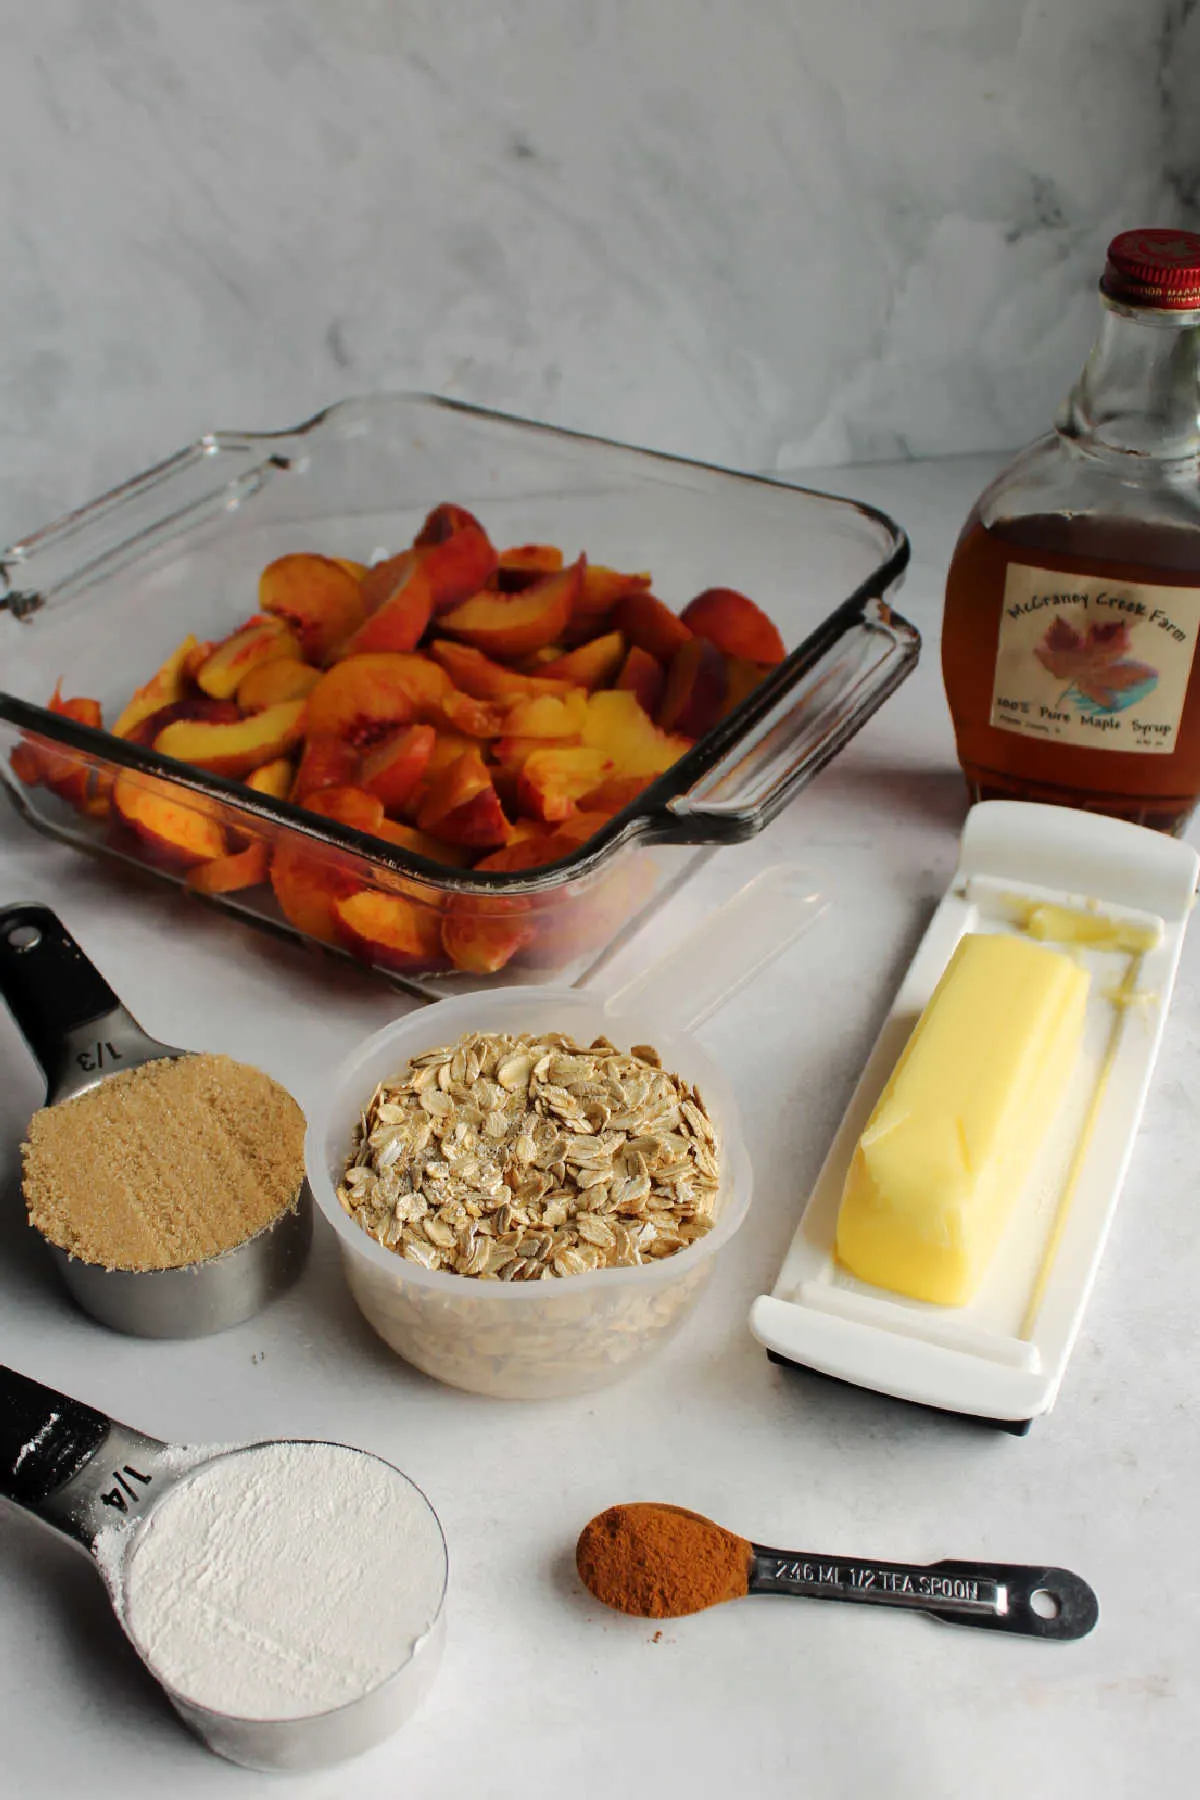 Ingredients ready to be made into peach crisp.